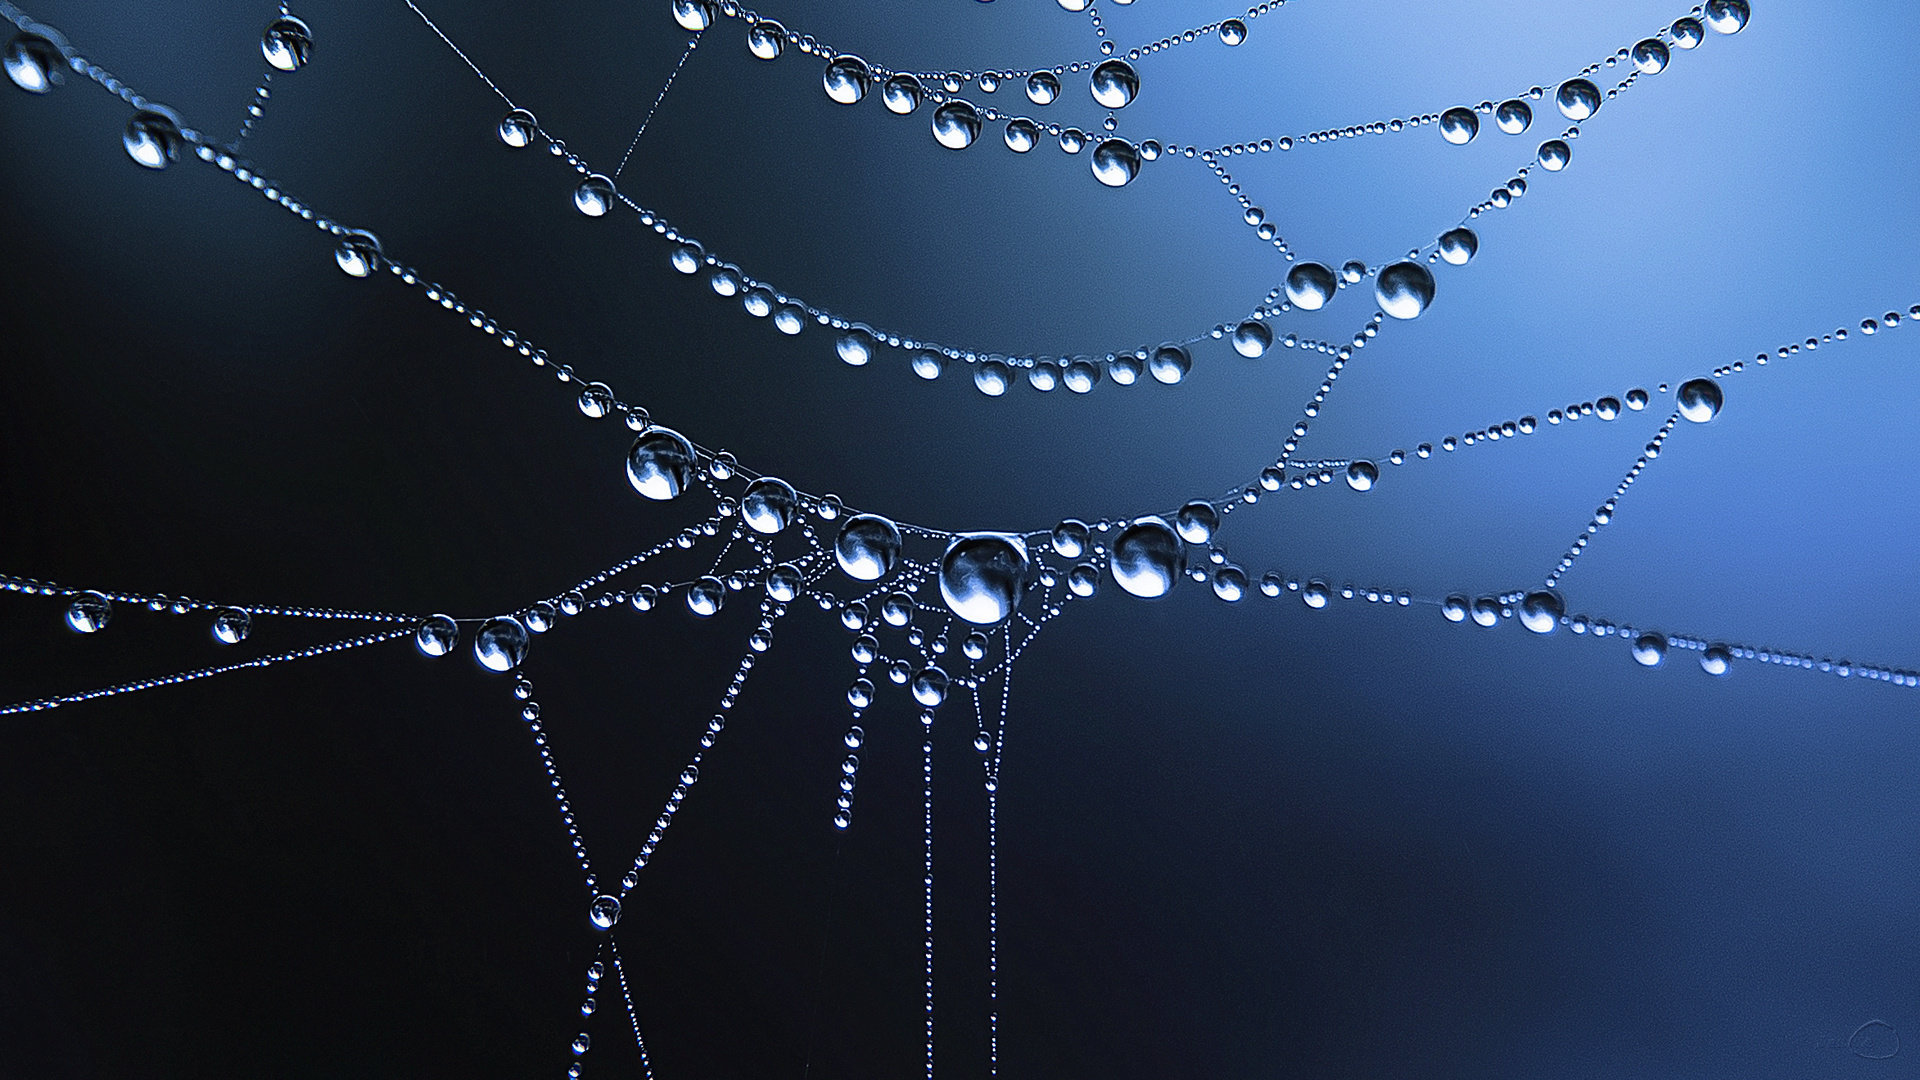 Awesome Spider Web free background ID:184829 for hd 1920x1080 desktop